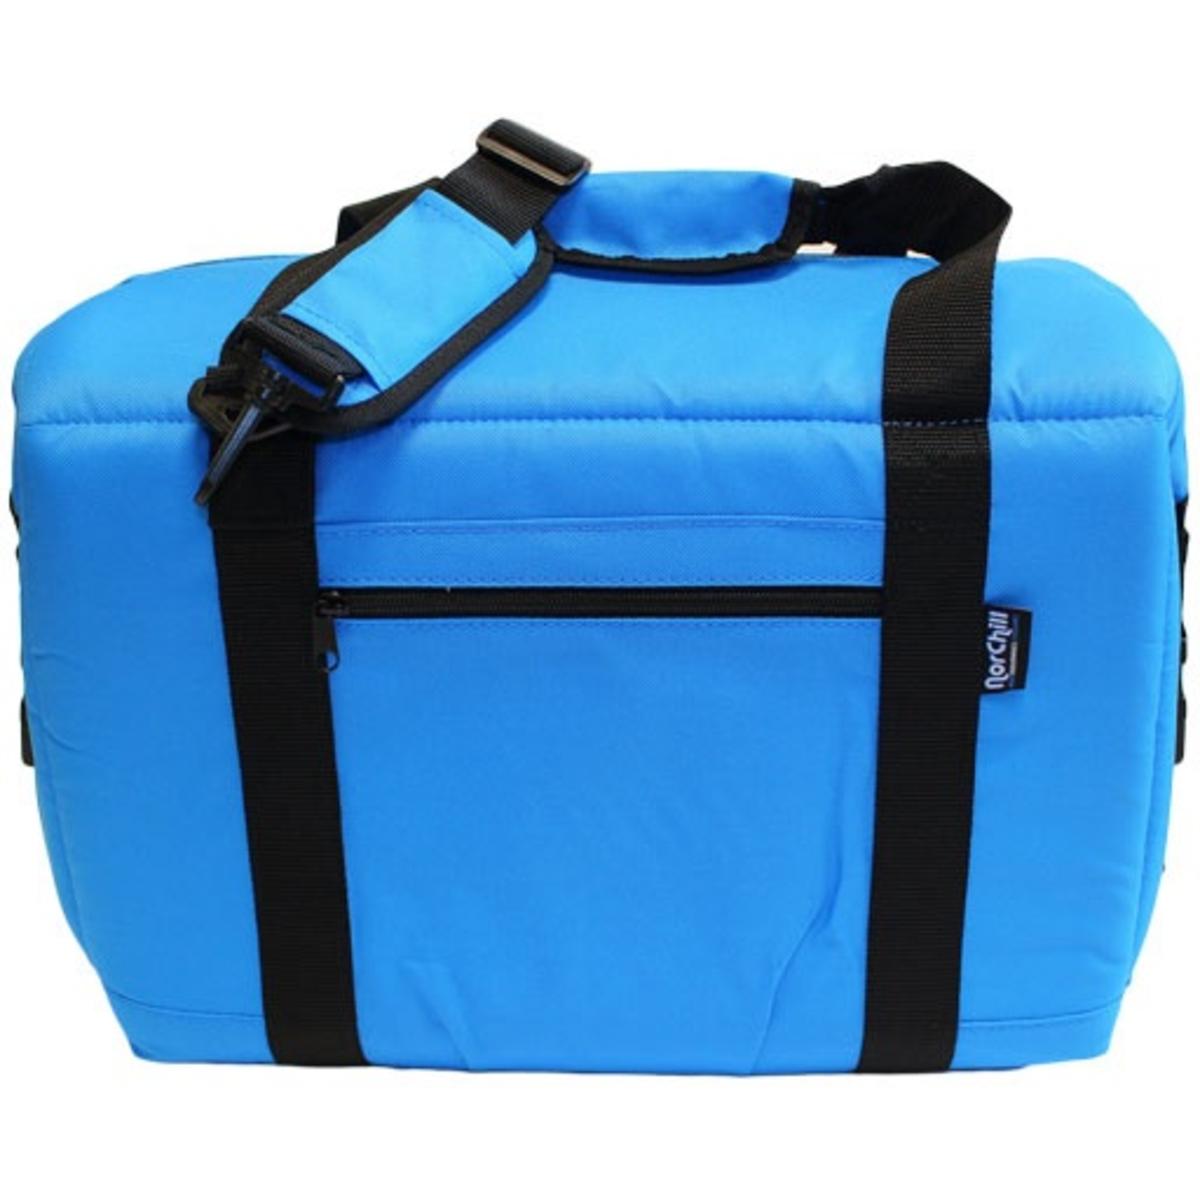 NorChill 24-Can High Performance Soft Sided Cooler Bag